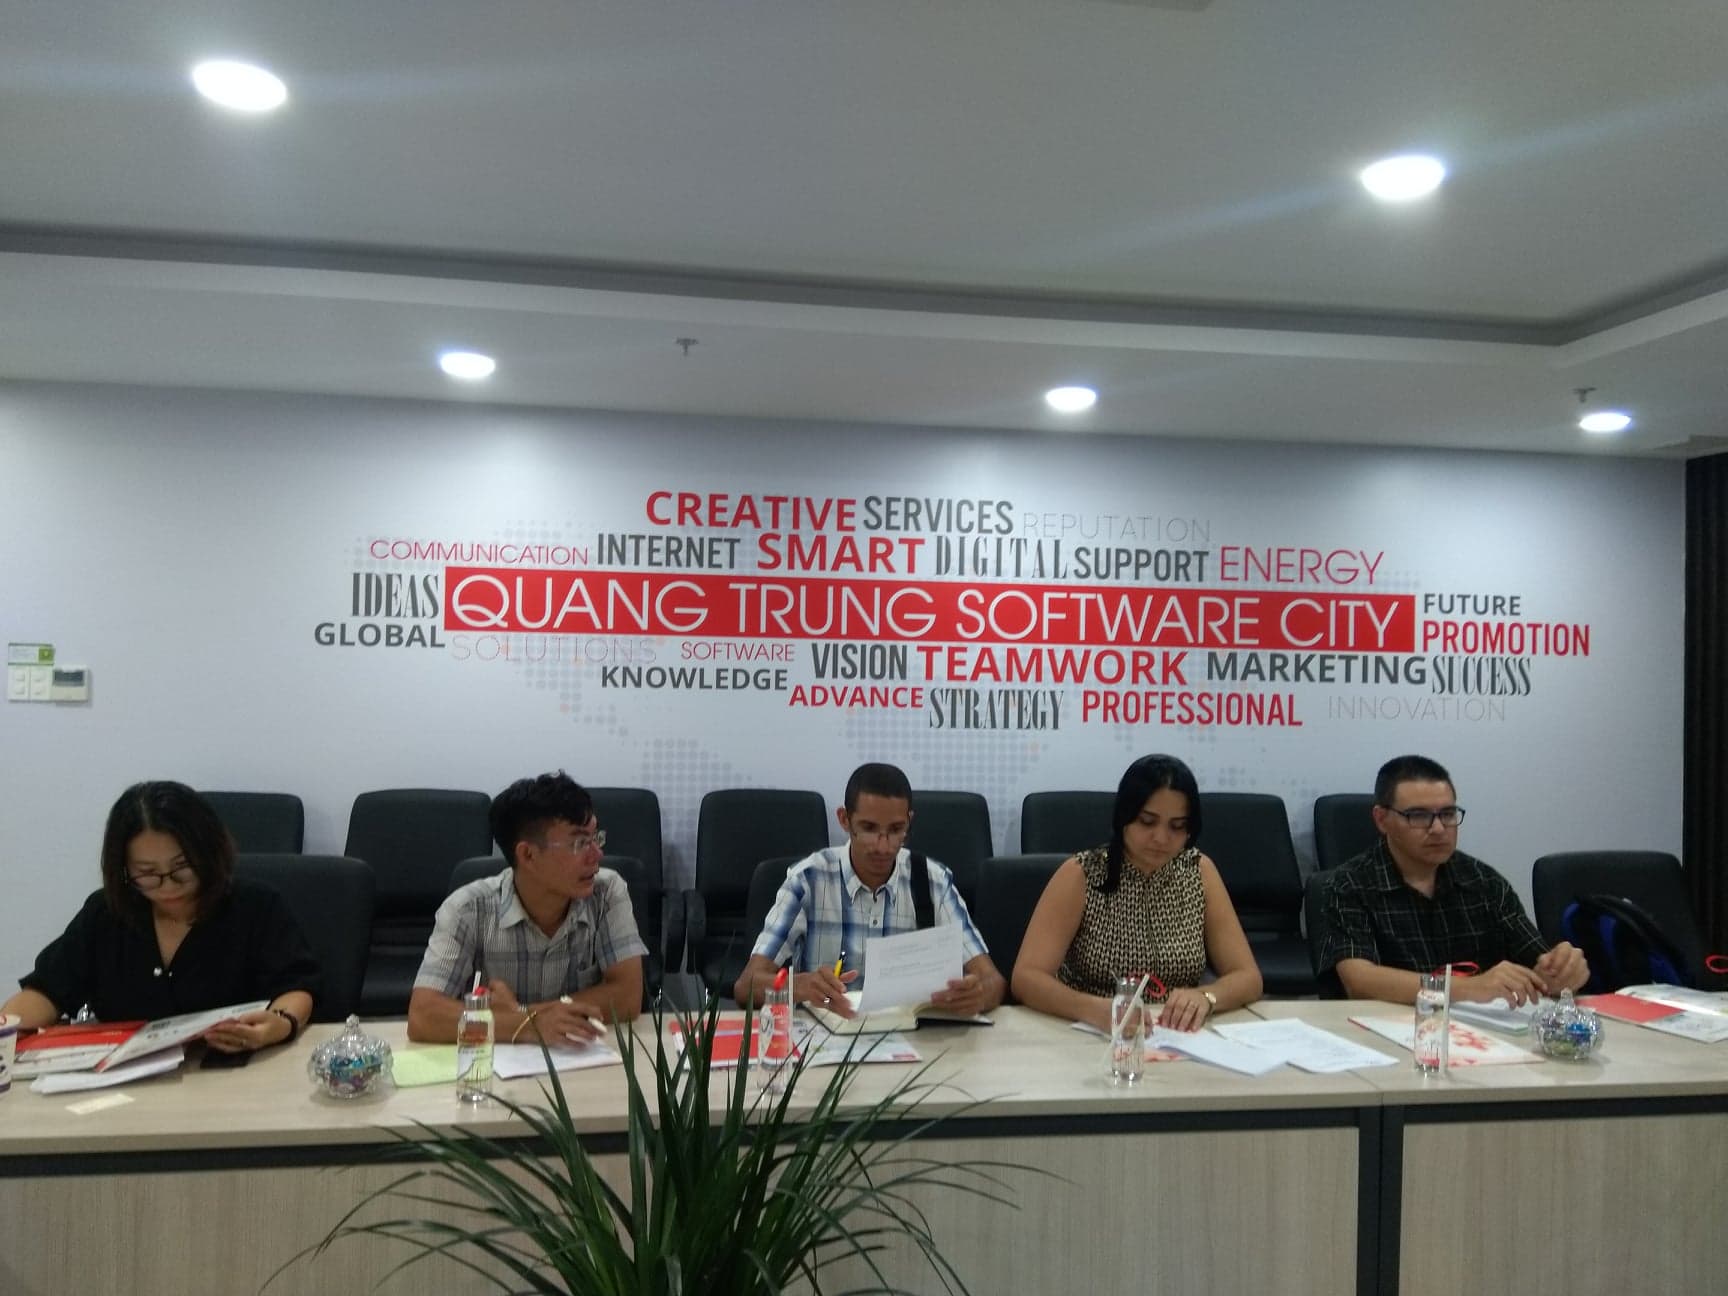 Cuban journalists to visit Quang Trung Software City